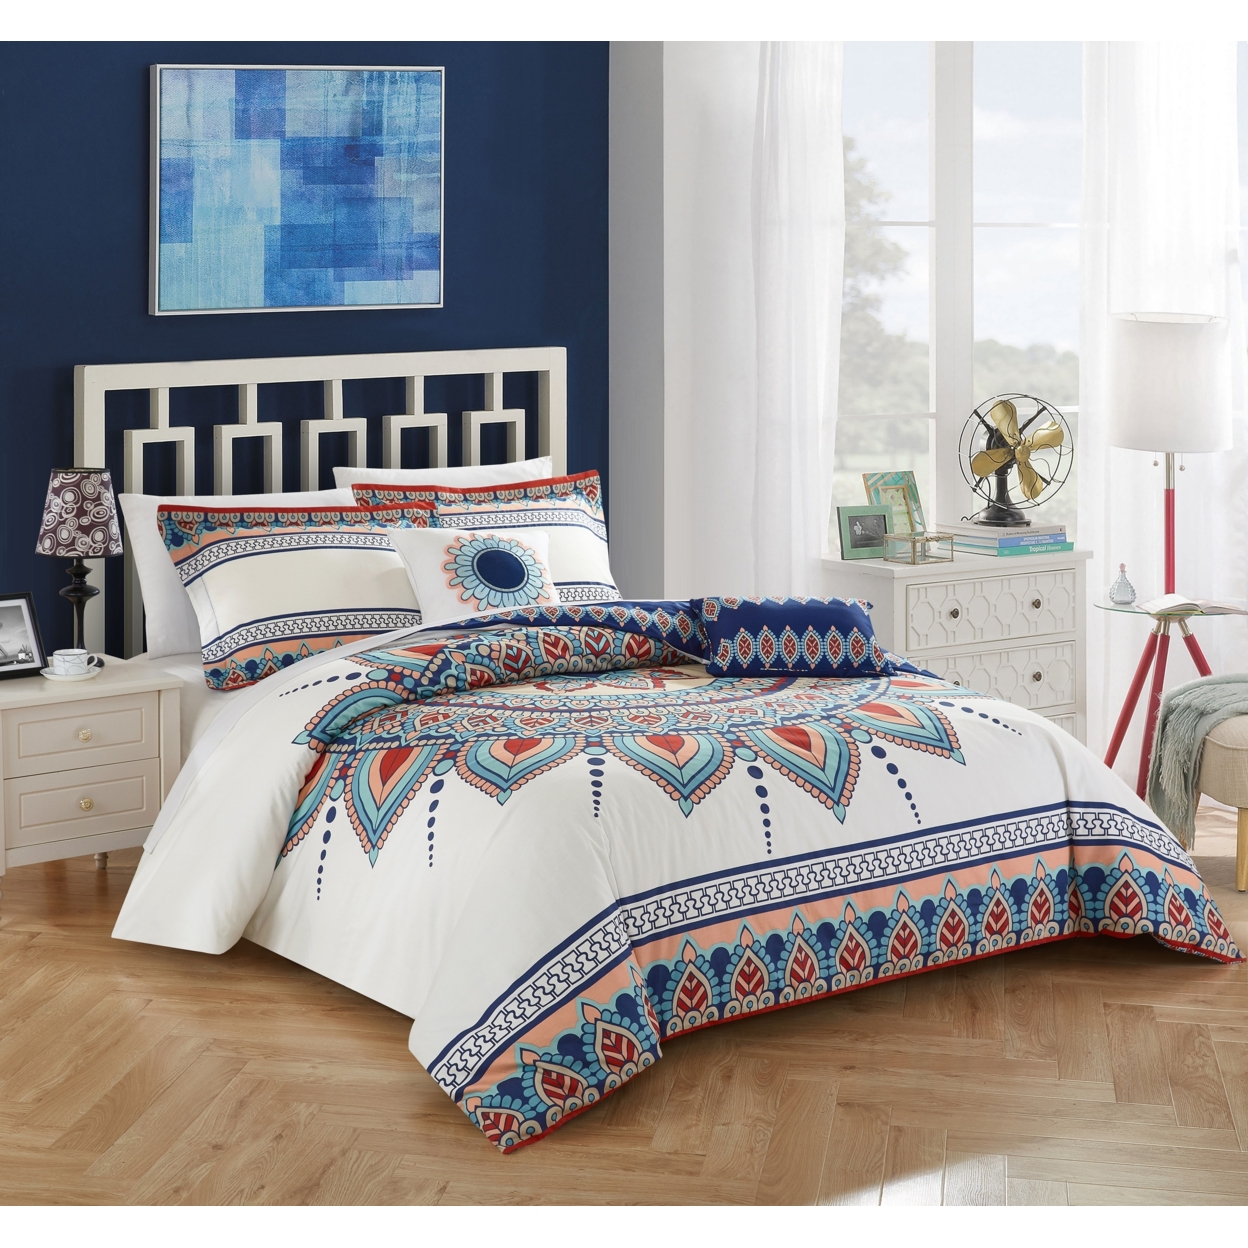 Chic Home 5 Piece Popo 100% Cotton 200 Thread Count Panel Frame Boho Printed REVERSIBLE Comforter Set - Queen